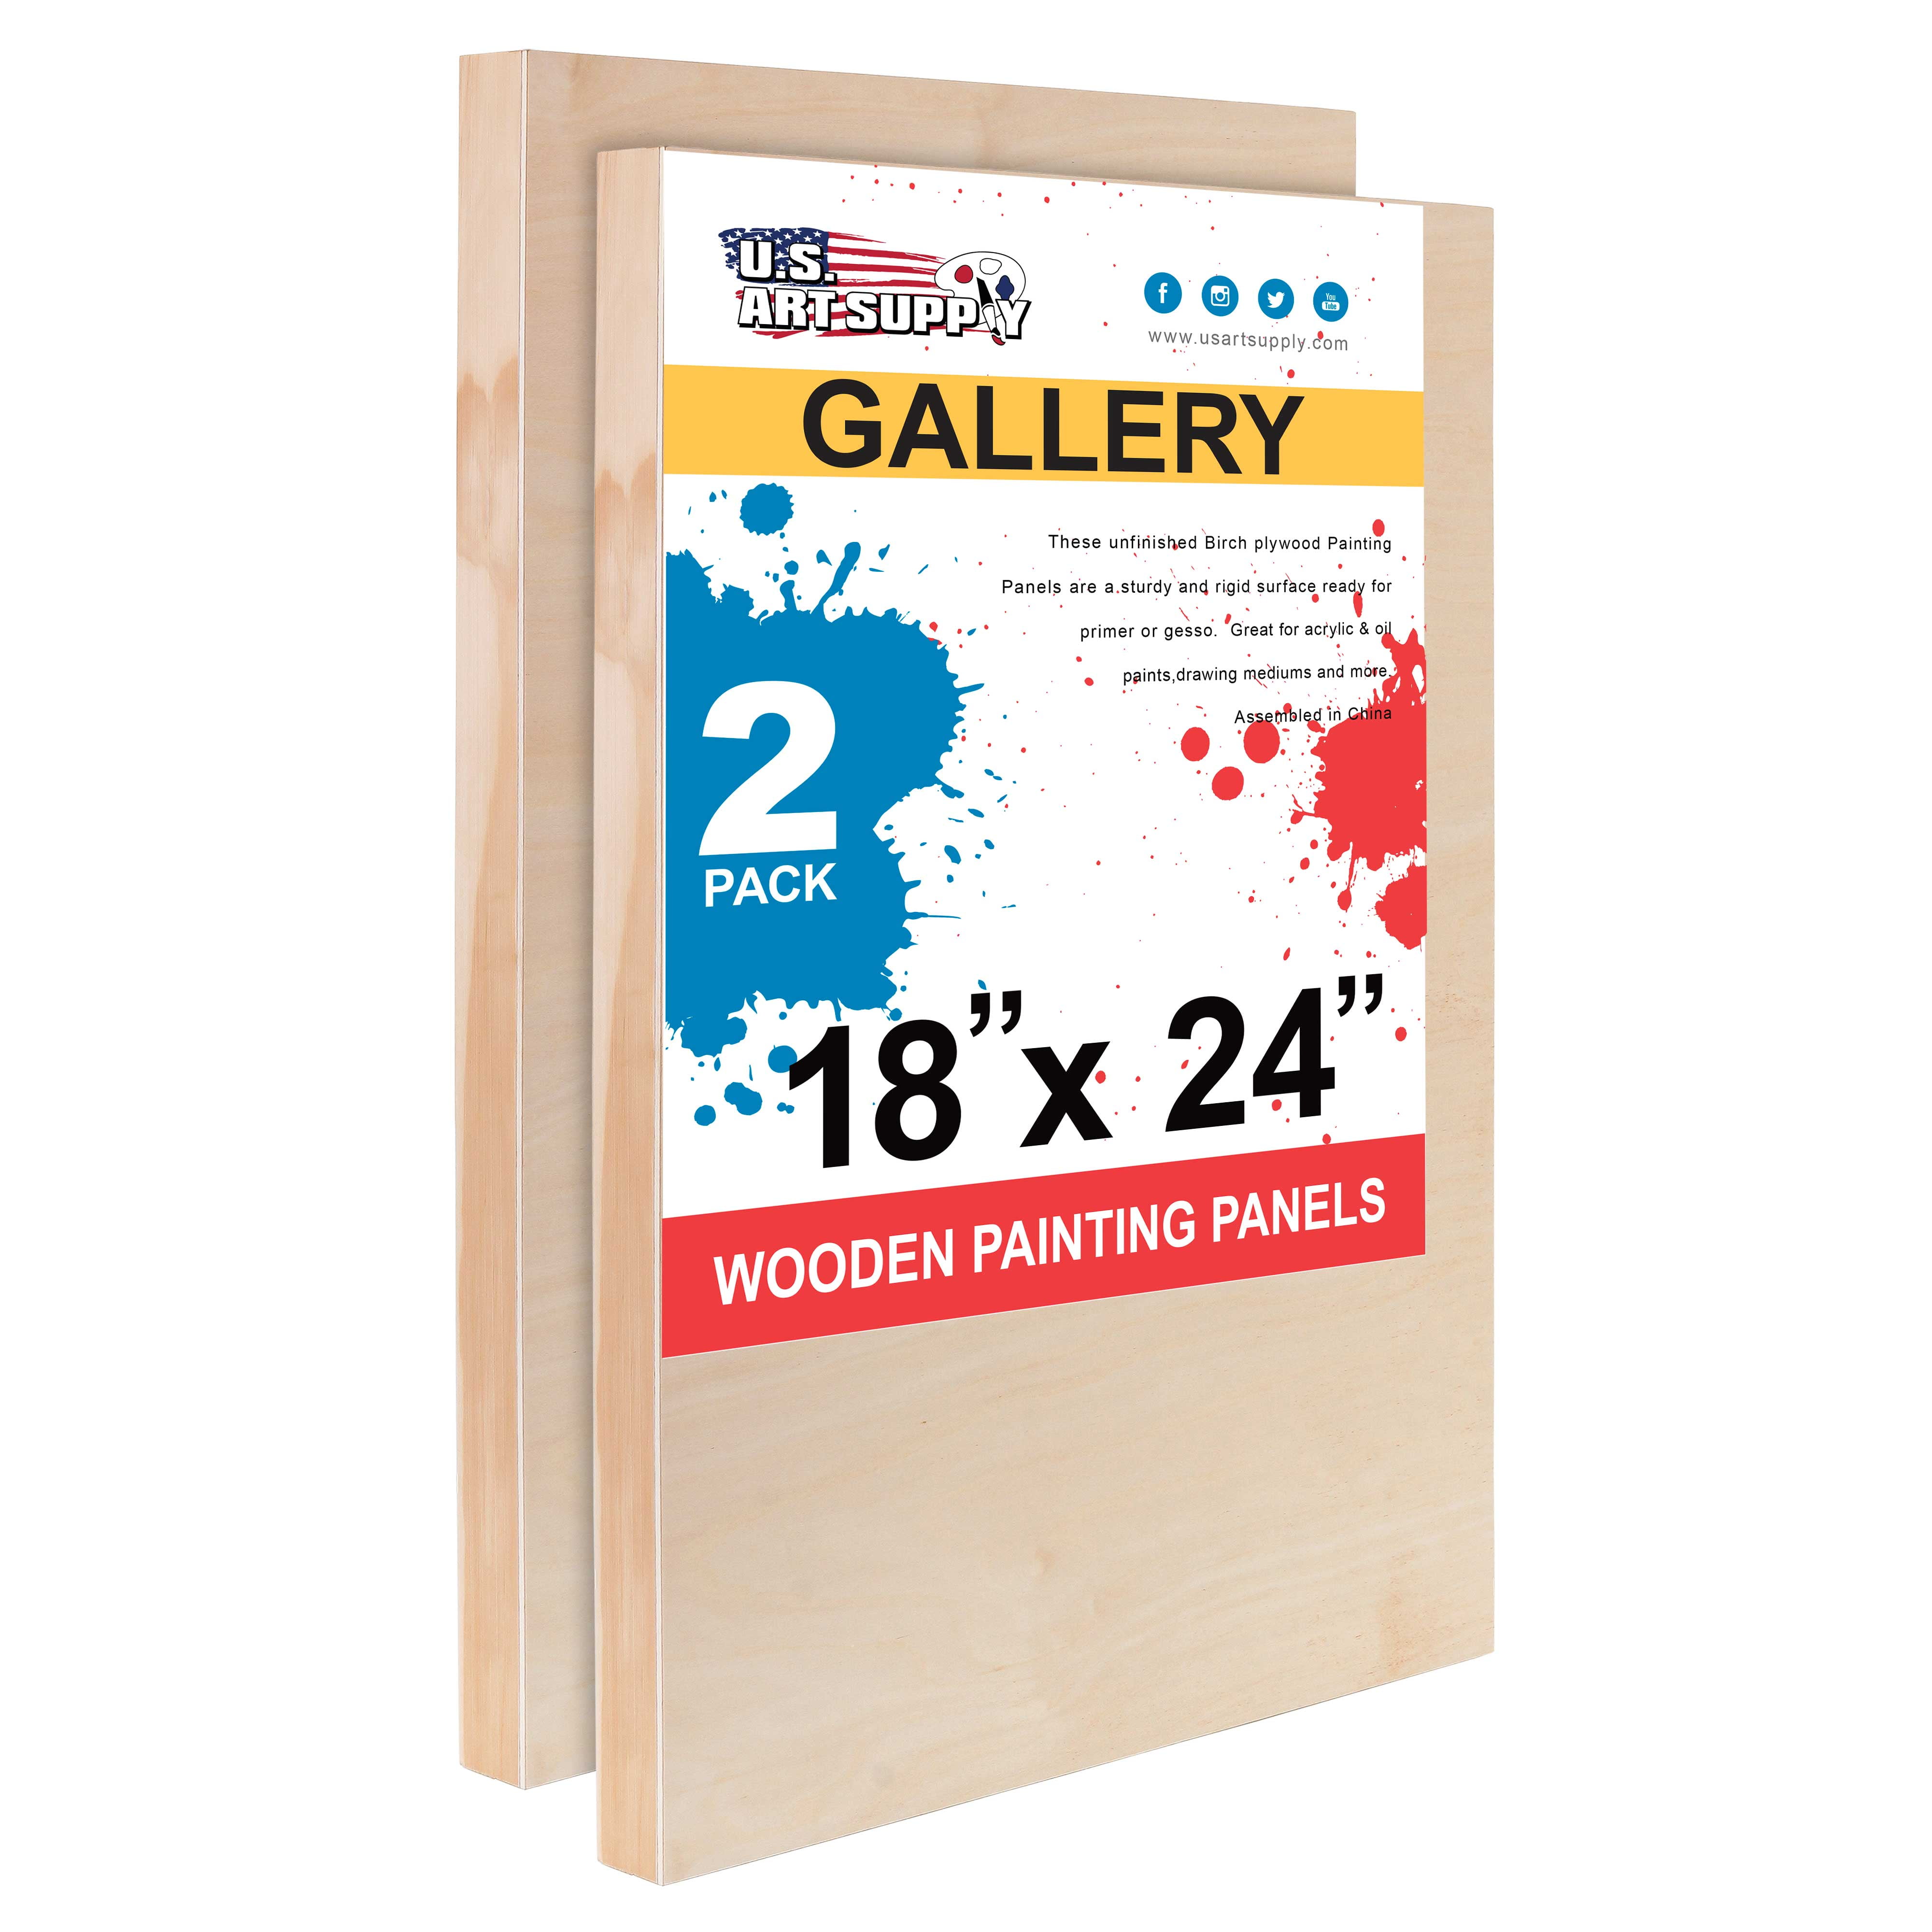 Painting Mixed-Media Craft Art Supply 10 x 10 Birch Wood Paint Pouring Panel Boards Acrylic U.S Gallery 1-1/2 Deep Cradle - Artist Depth Wooden Wall Canvases Encaustic Oil Pack of 4 